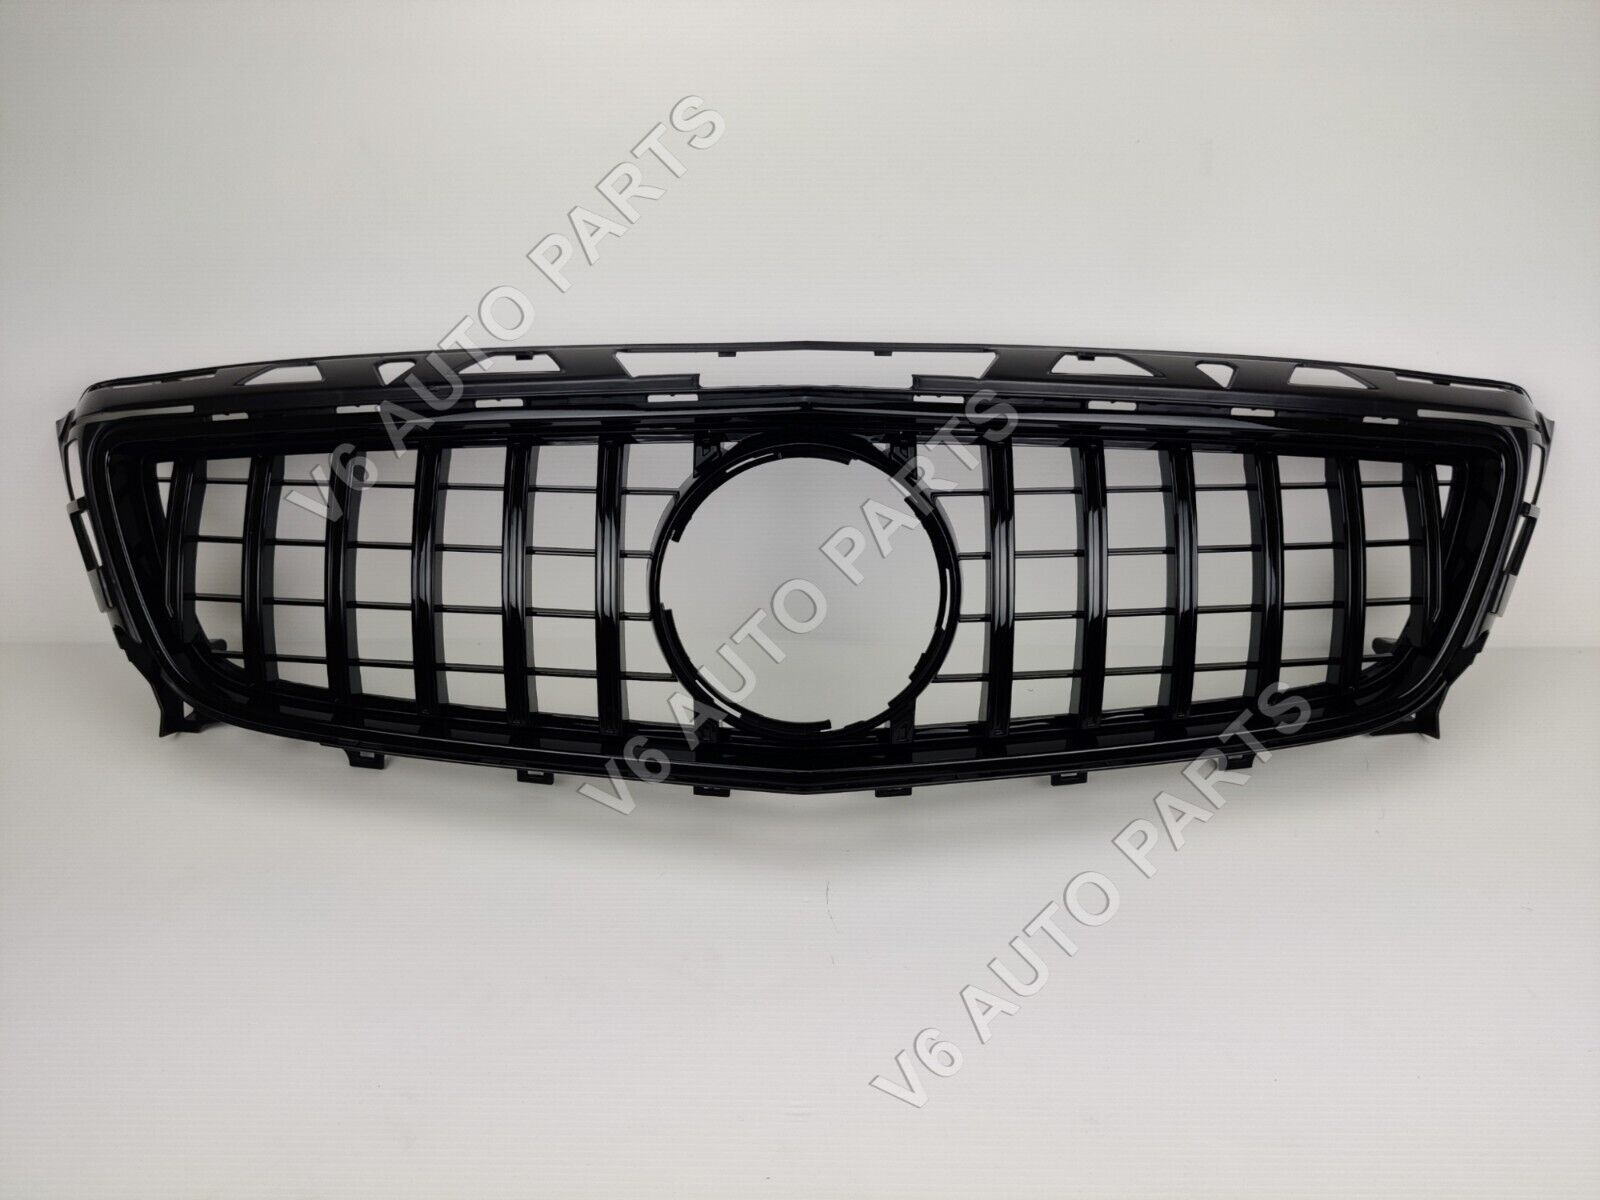 For Mercedes CLS-Class C218 CLS320 Front Bumper AMG Sport Grille 2011-2014 Coupe